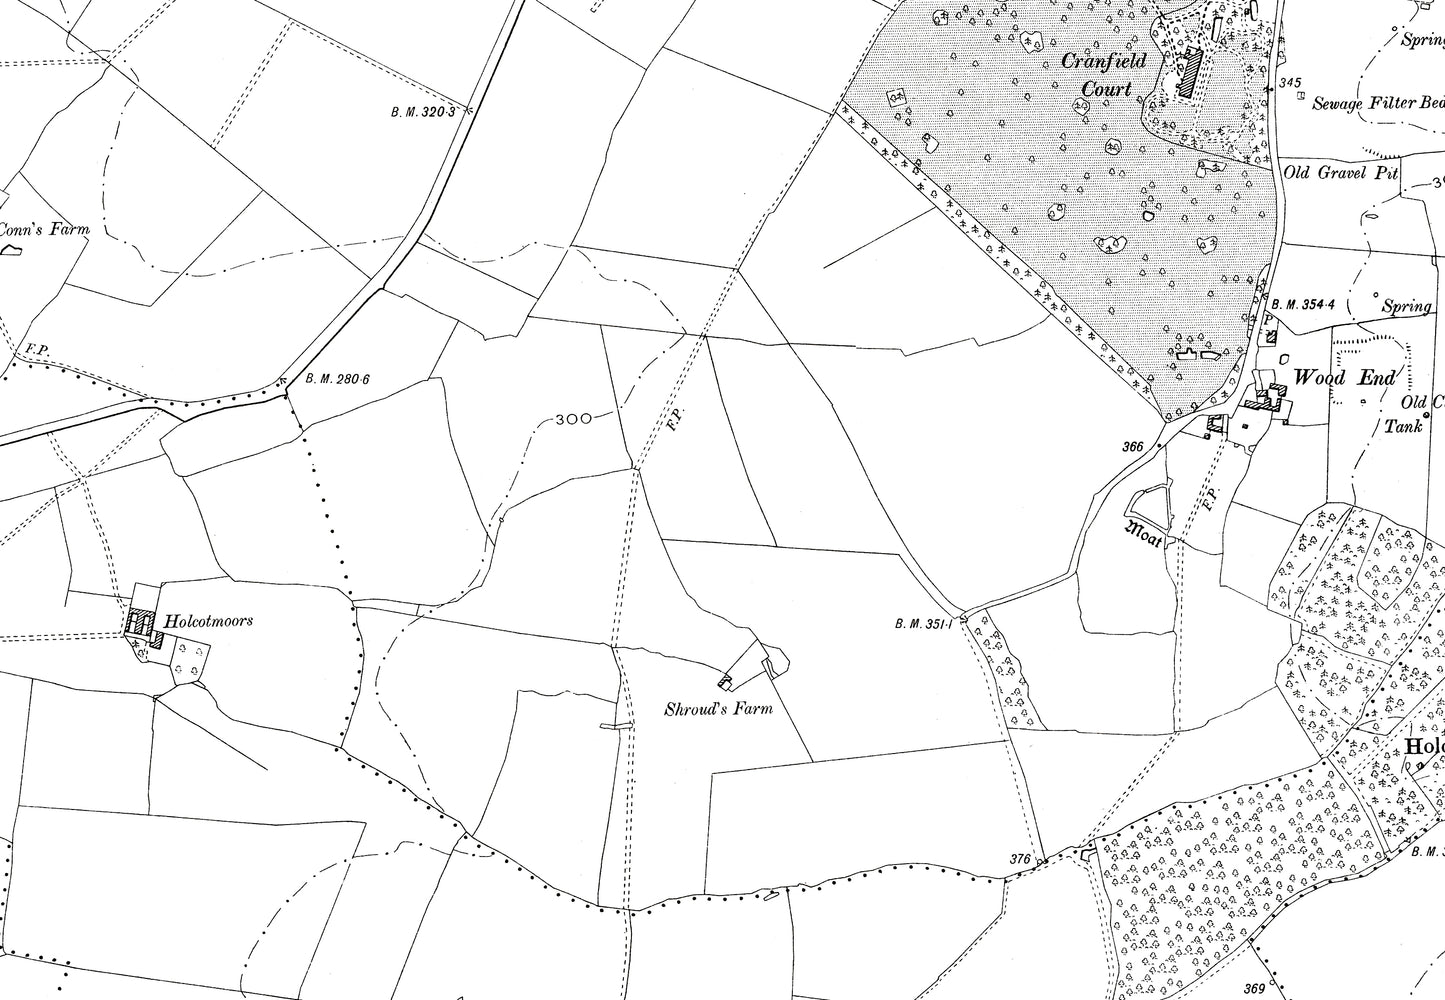 A 1902 map showing Cranfield (south) and Salford (north) in Bedfordshire - A Digital Download 0f OS 1:10560 scale map, Beds 20NE